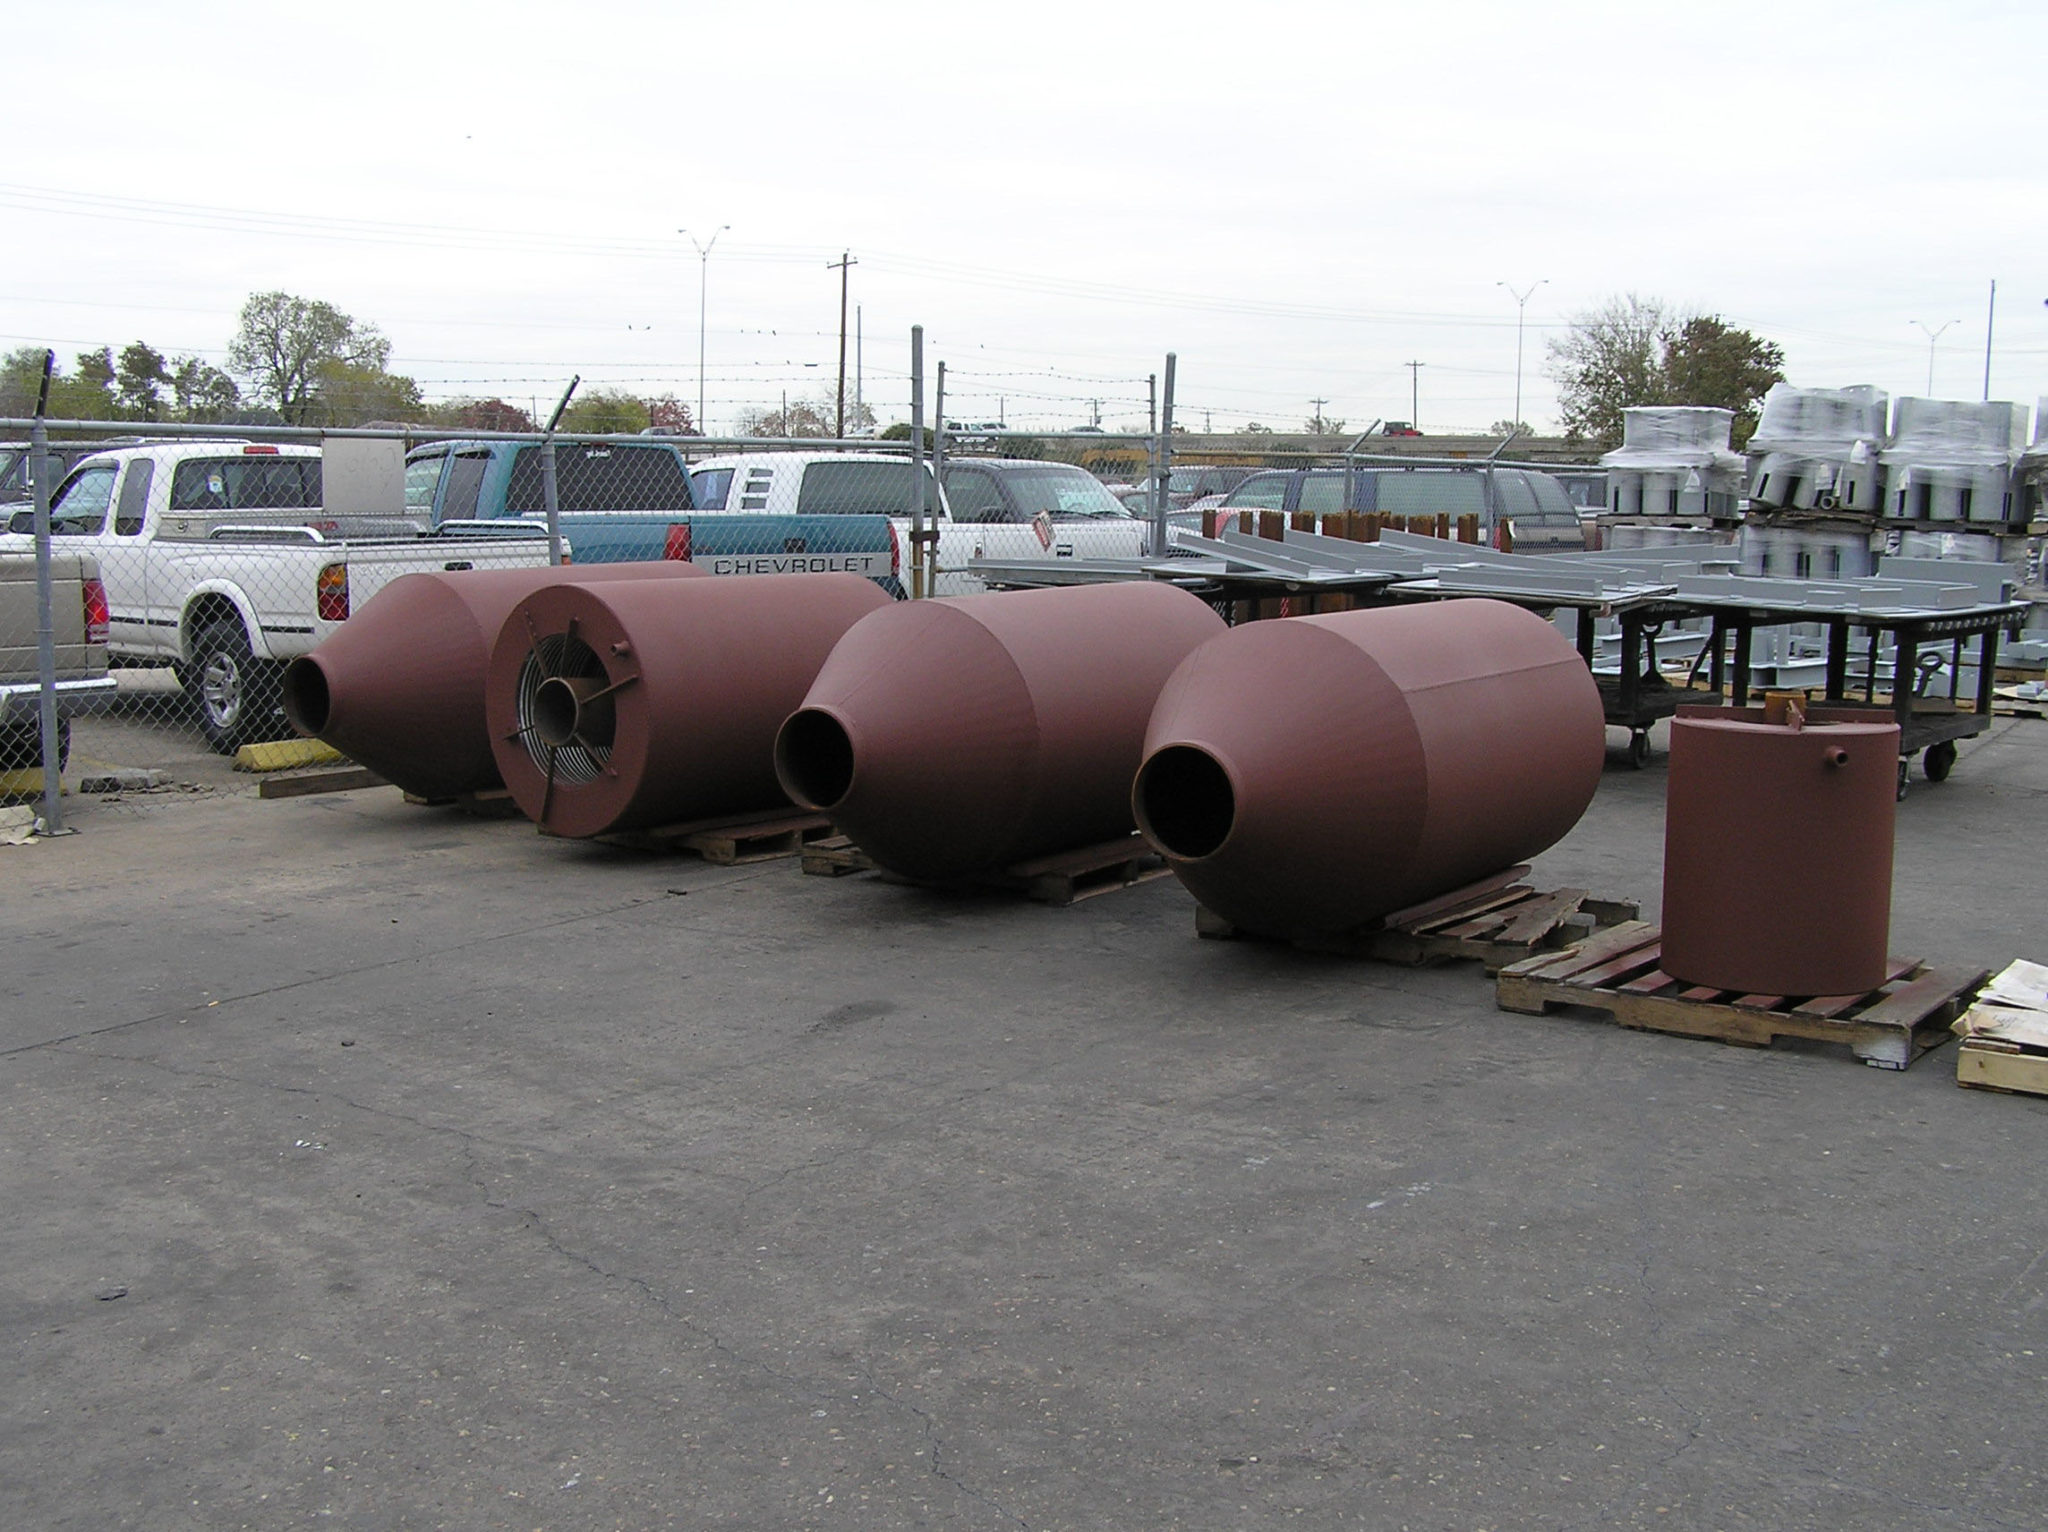 U.S. Bellows, Inc. Designed and Fabricated 15 Expansion Joints for a Power Generation Company in Wisconsin